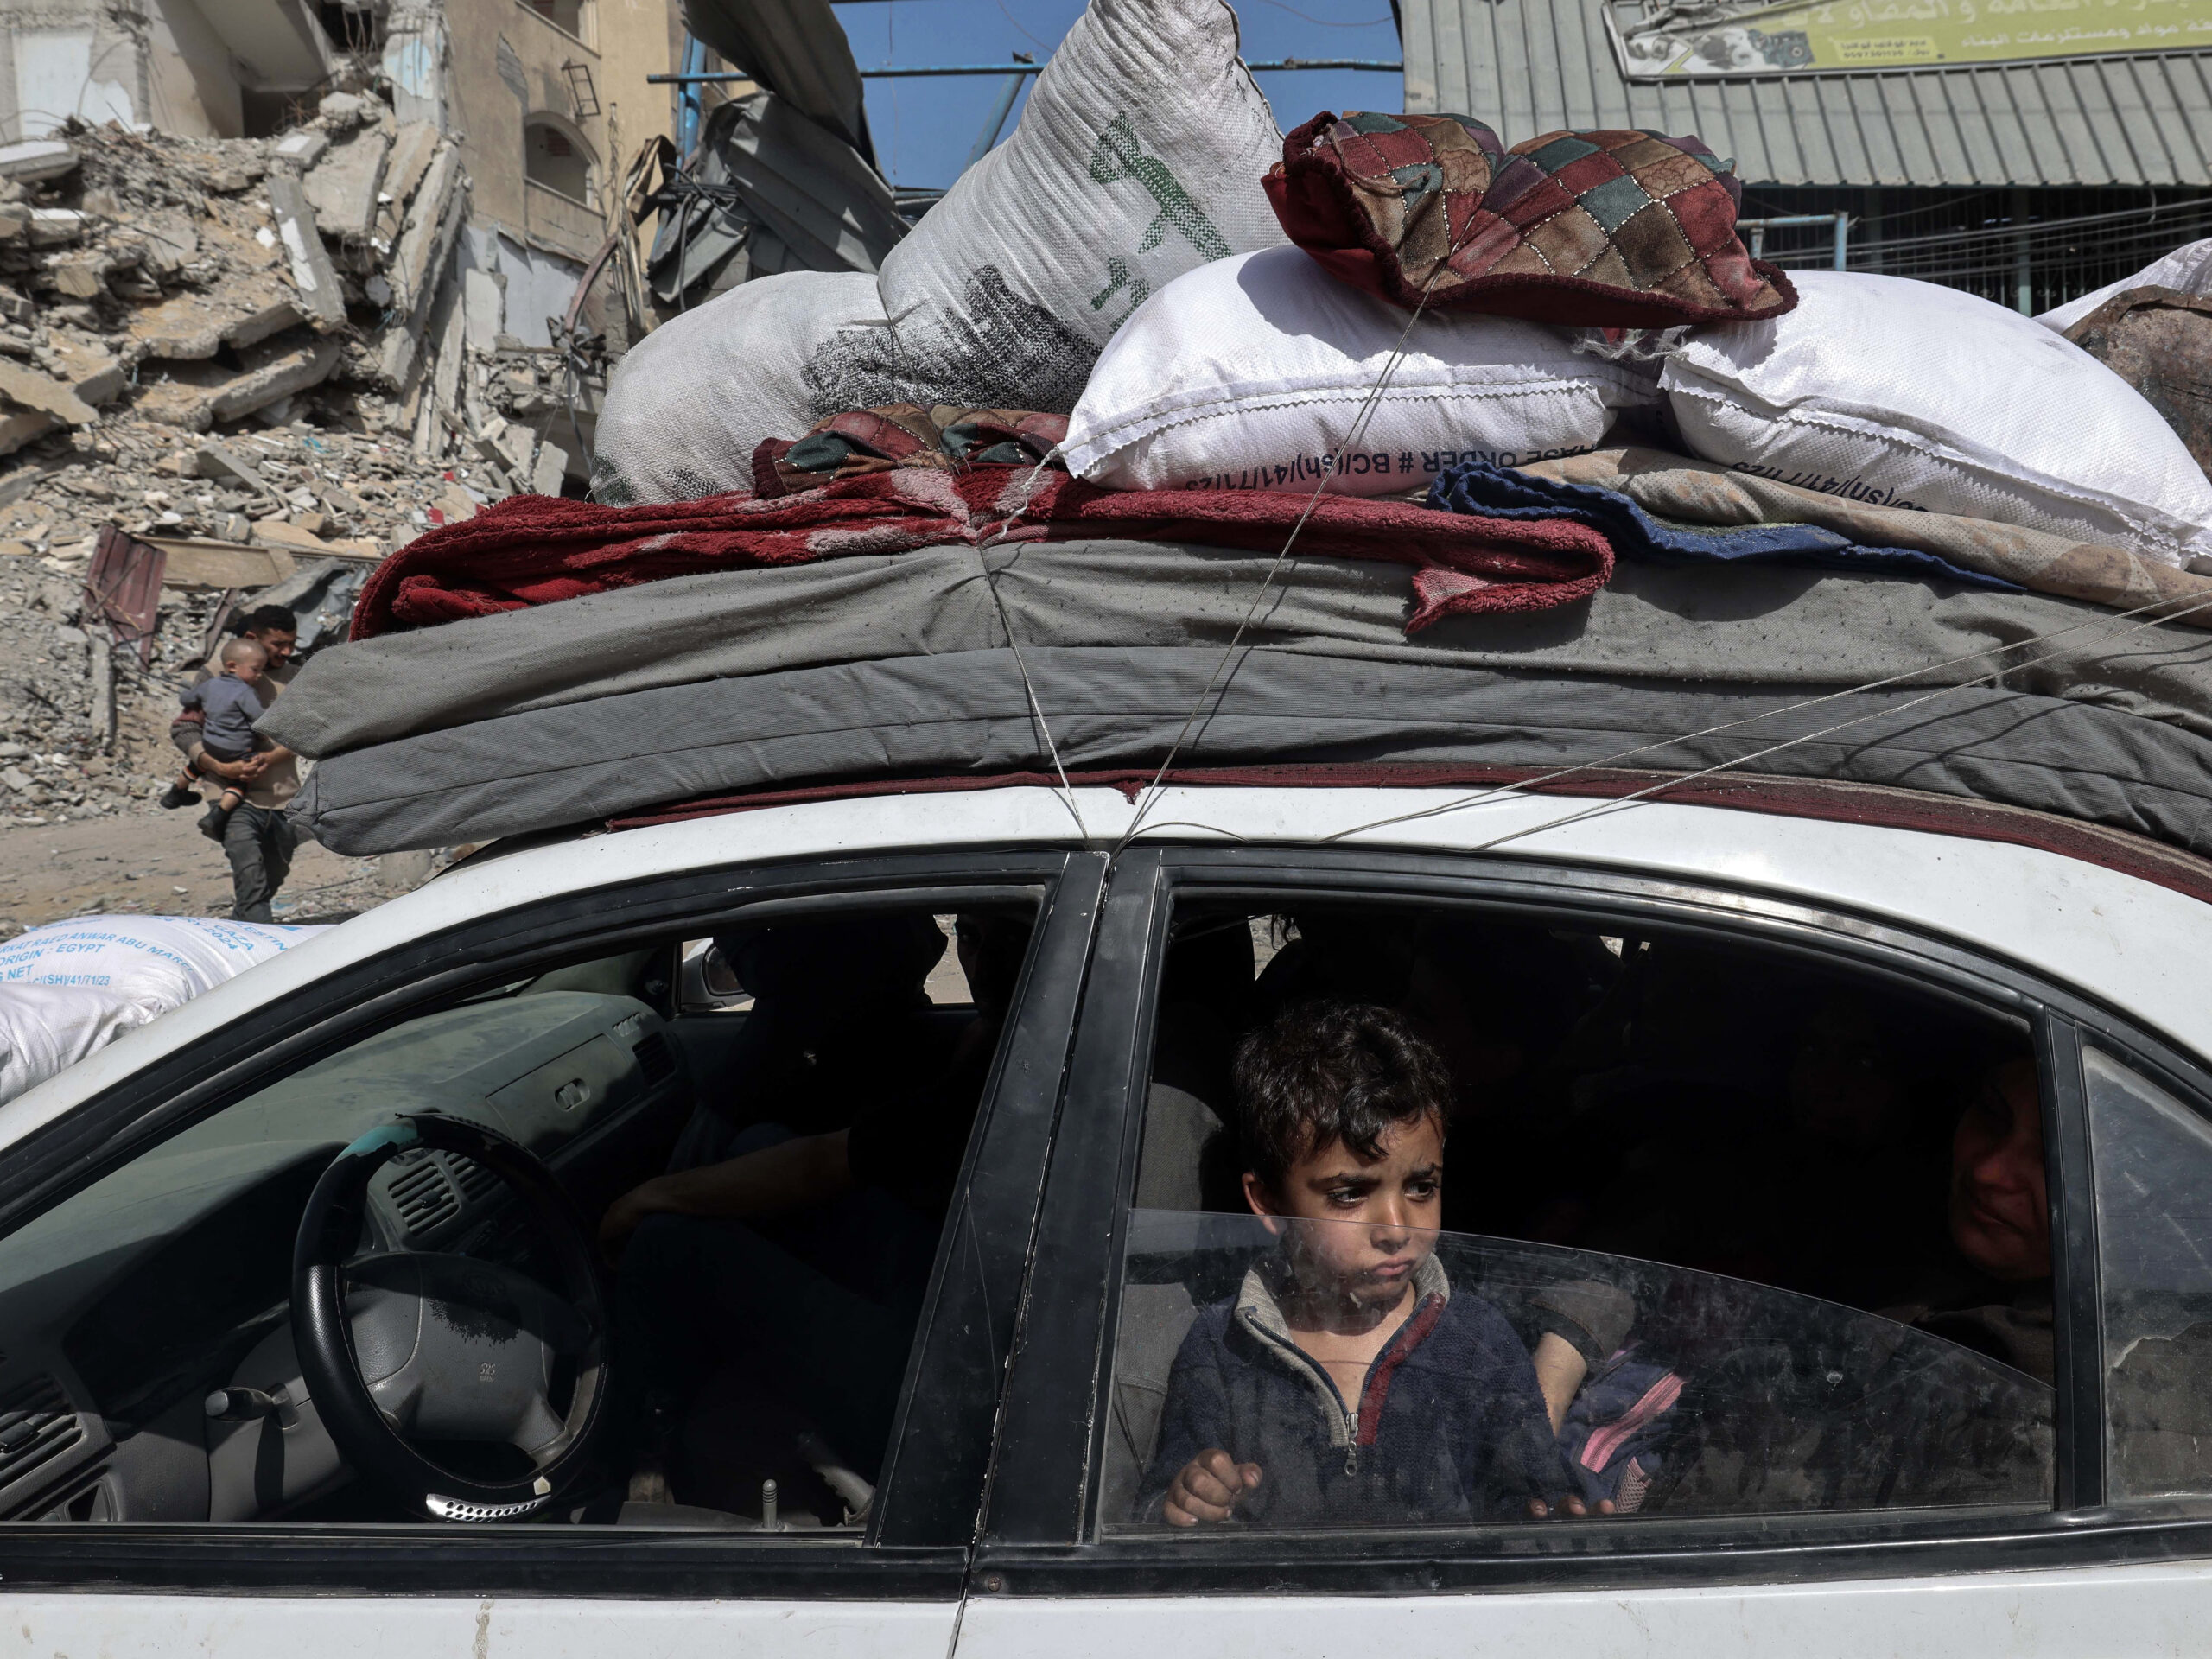 A young boy looks out from a car as members of a Palestinian family leave Rafah in the southern Gaza Strip with personal belongings on March 31.